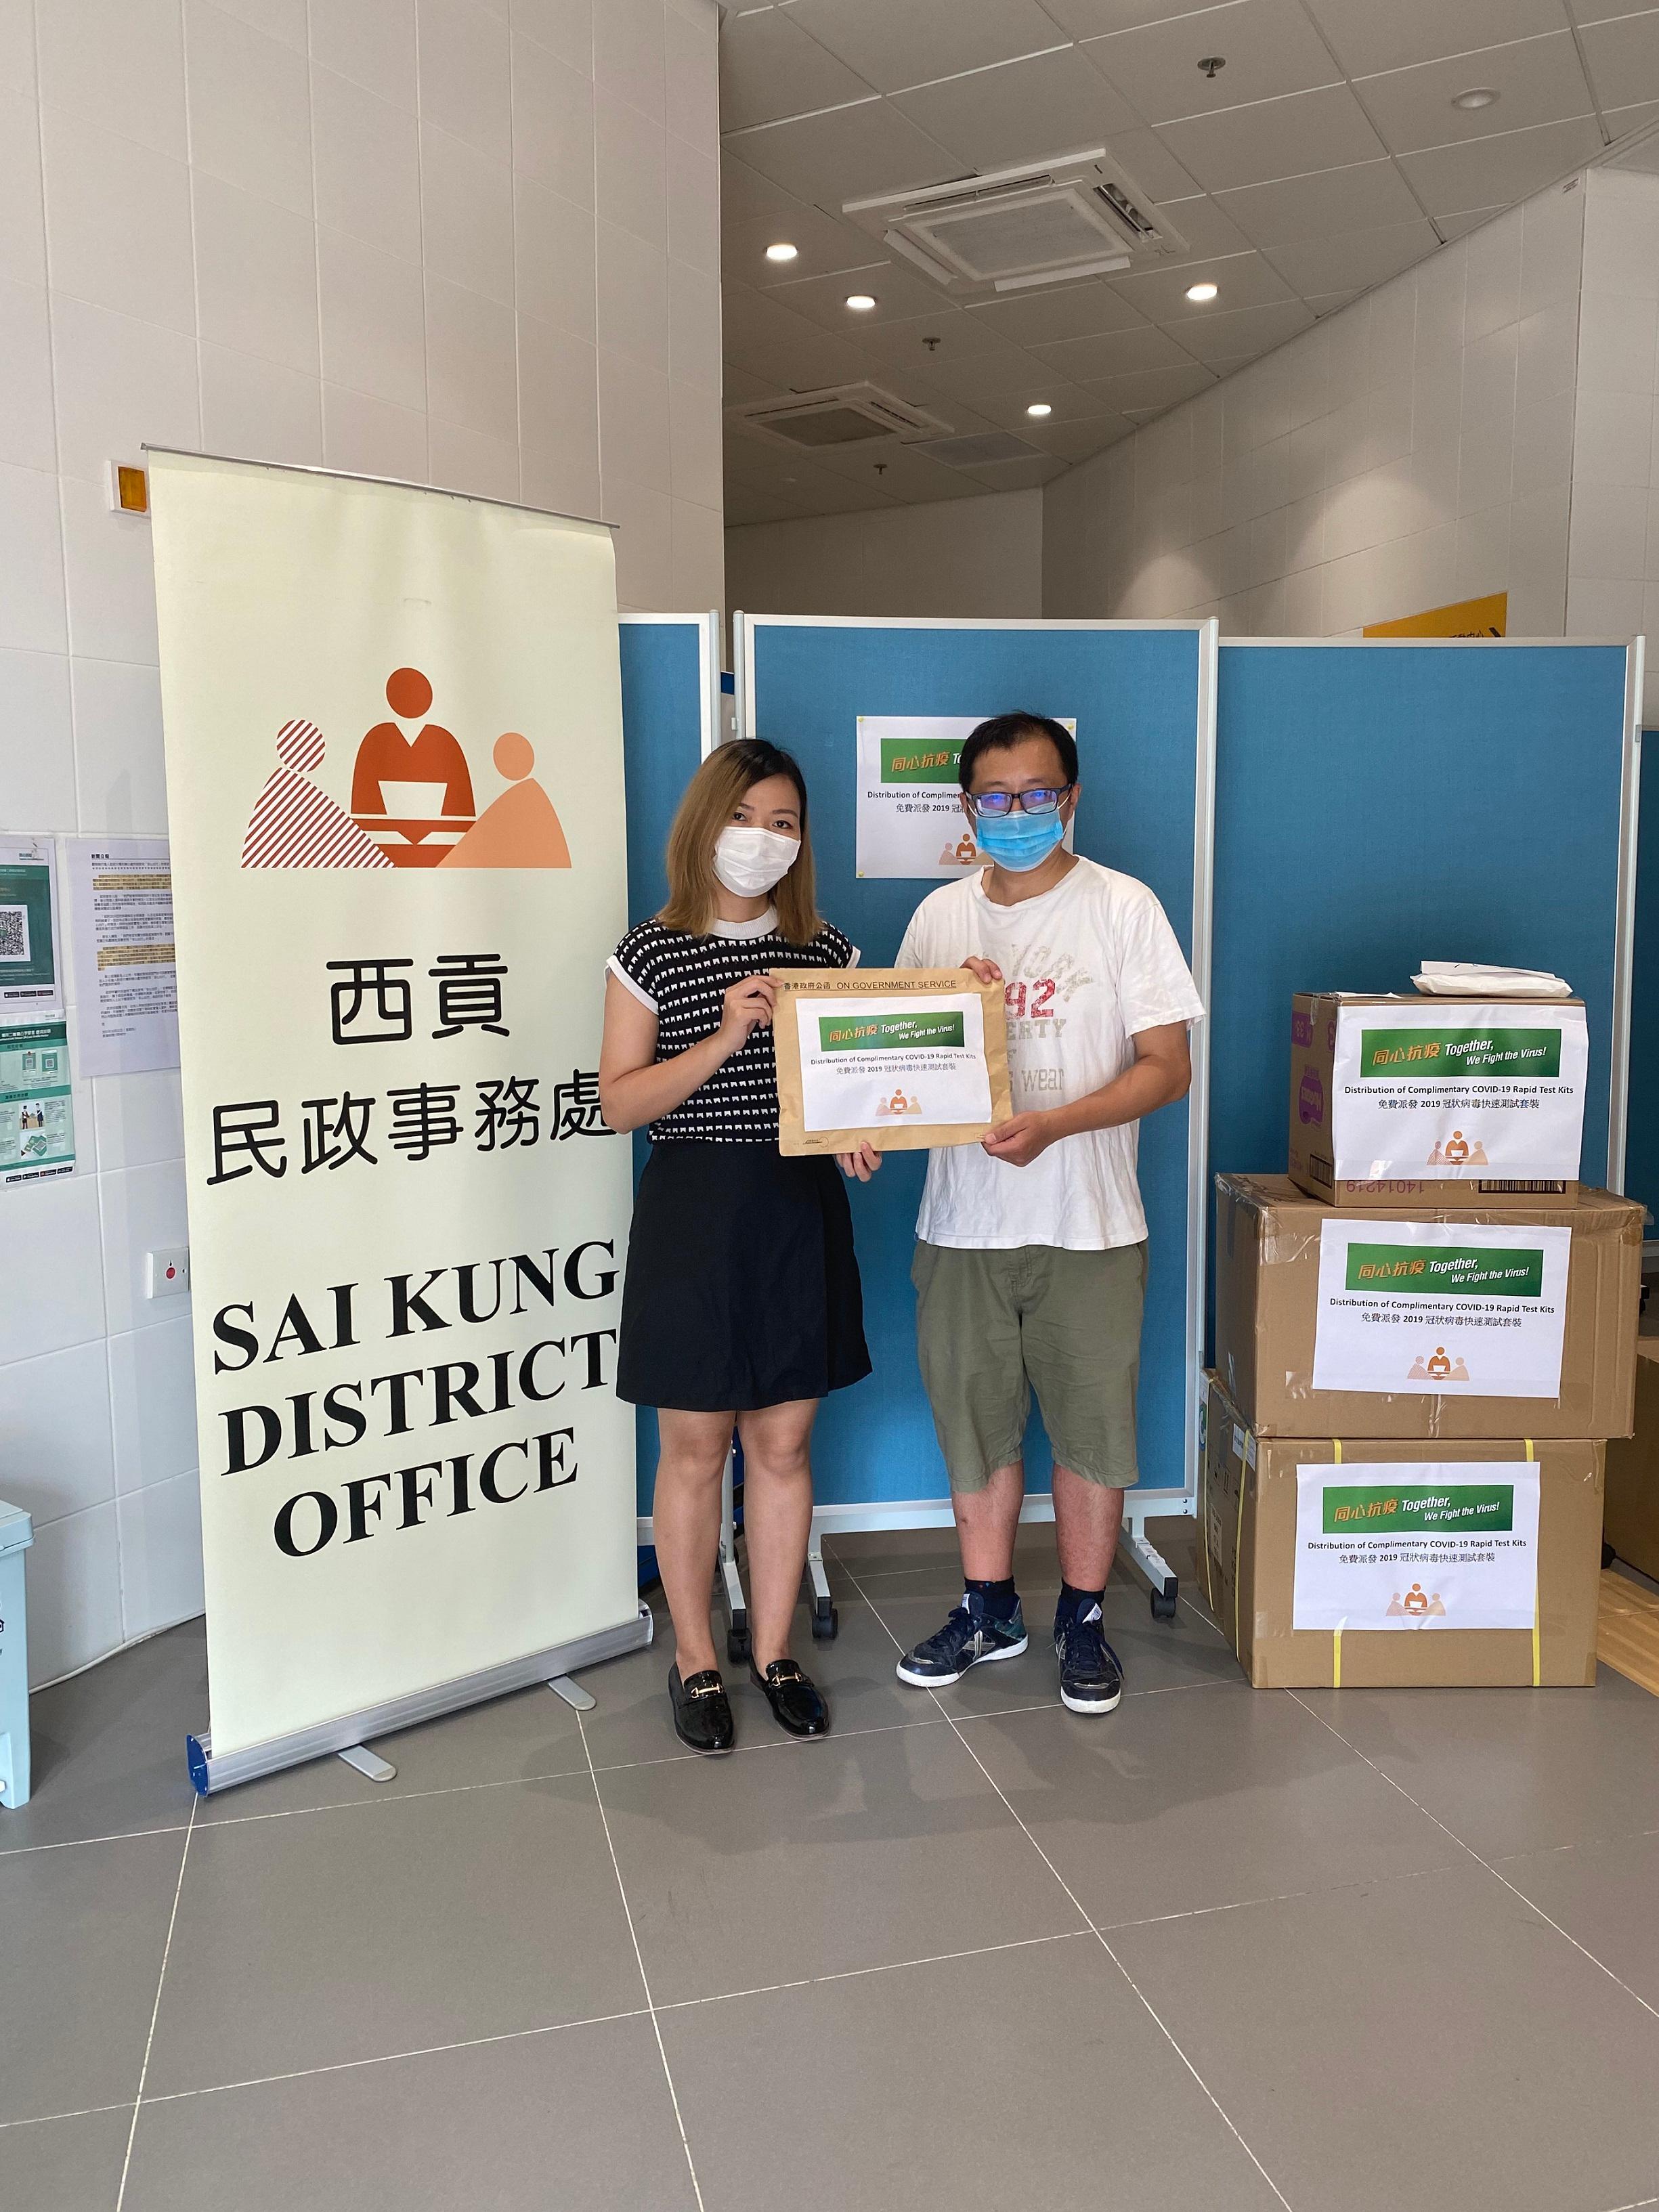 The Sai Kung District Office today (July 15) distributed COVID-19 rapid test kits to households, cleansing workers and property management staff living and working in The Beaumount for voluntary testing through the property management company.

